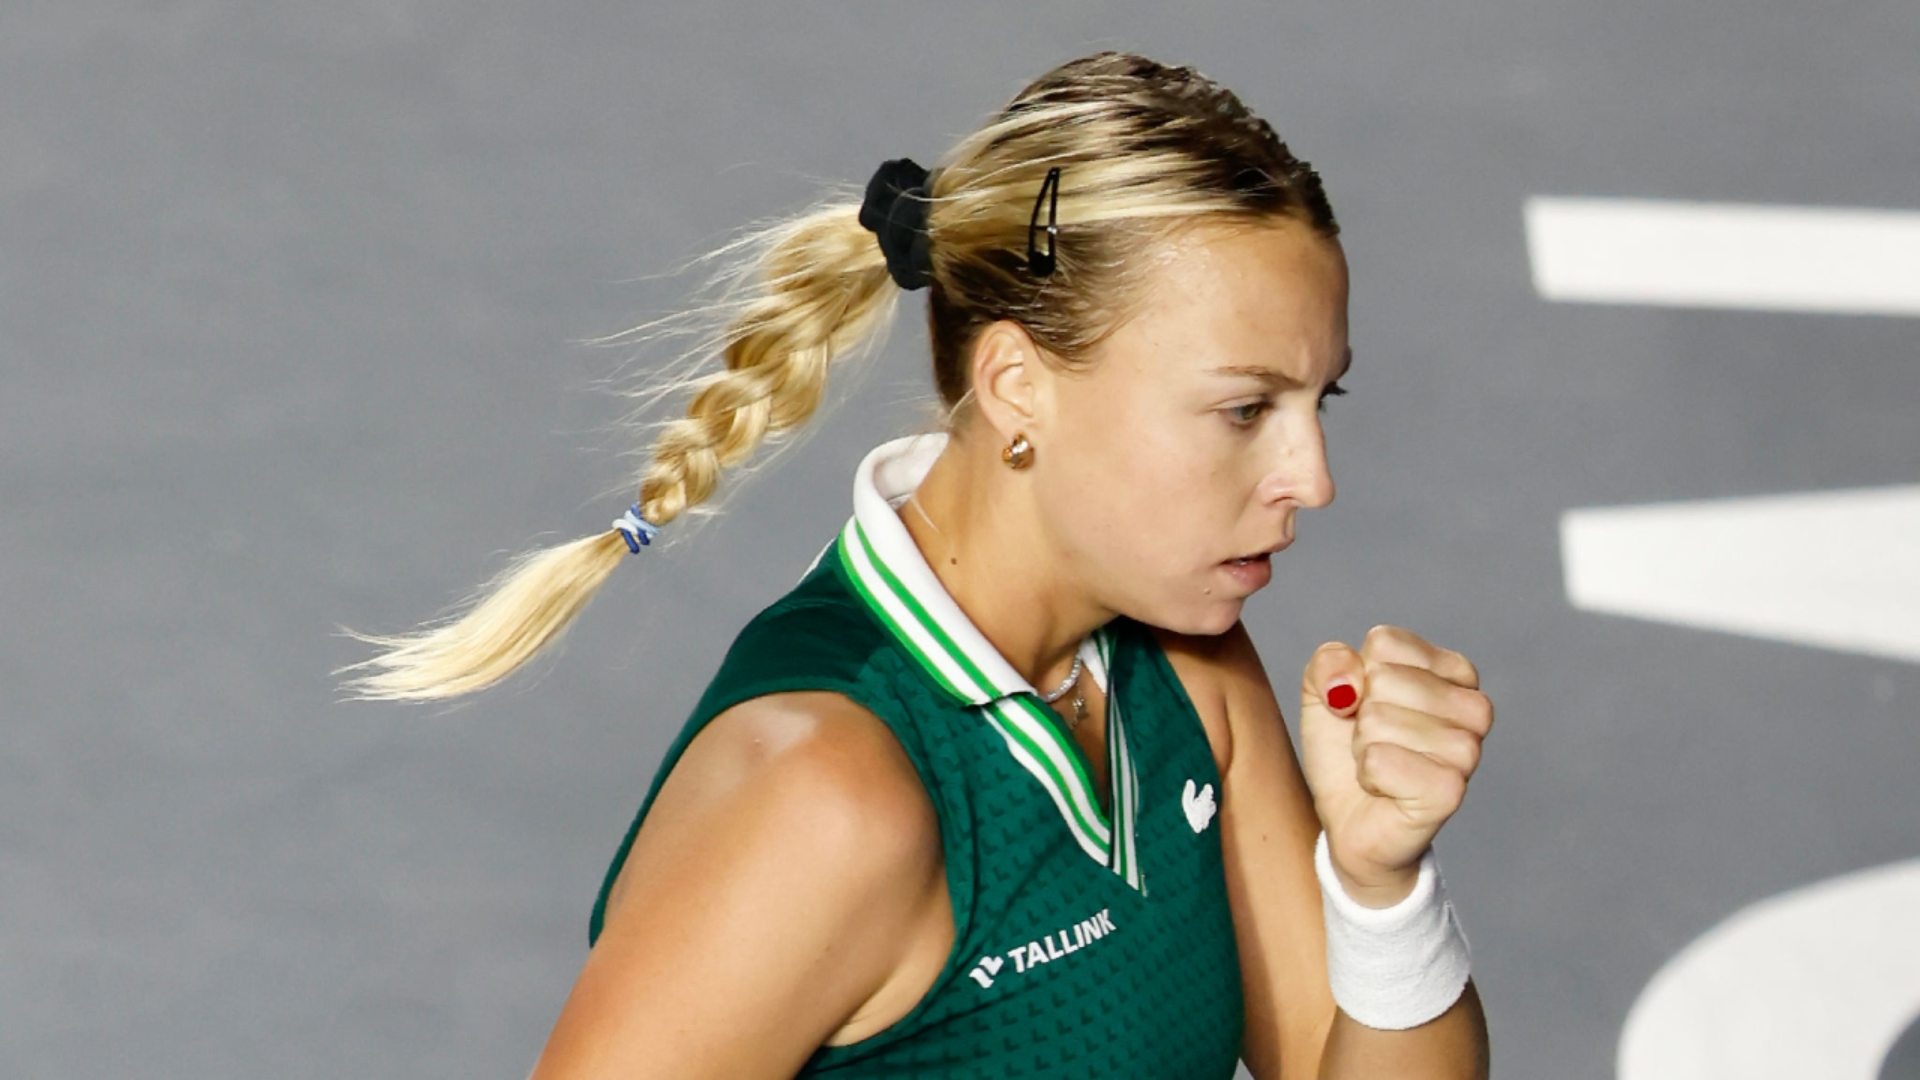 Anett Kontaveit in a file photo (Image credits: Twitter)